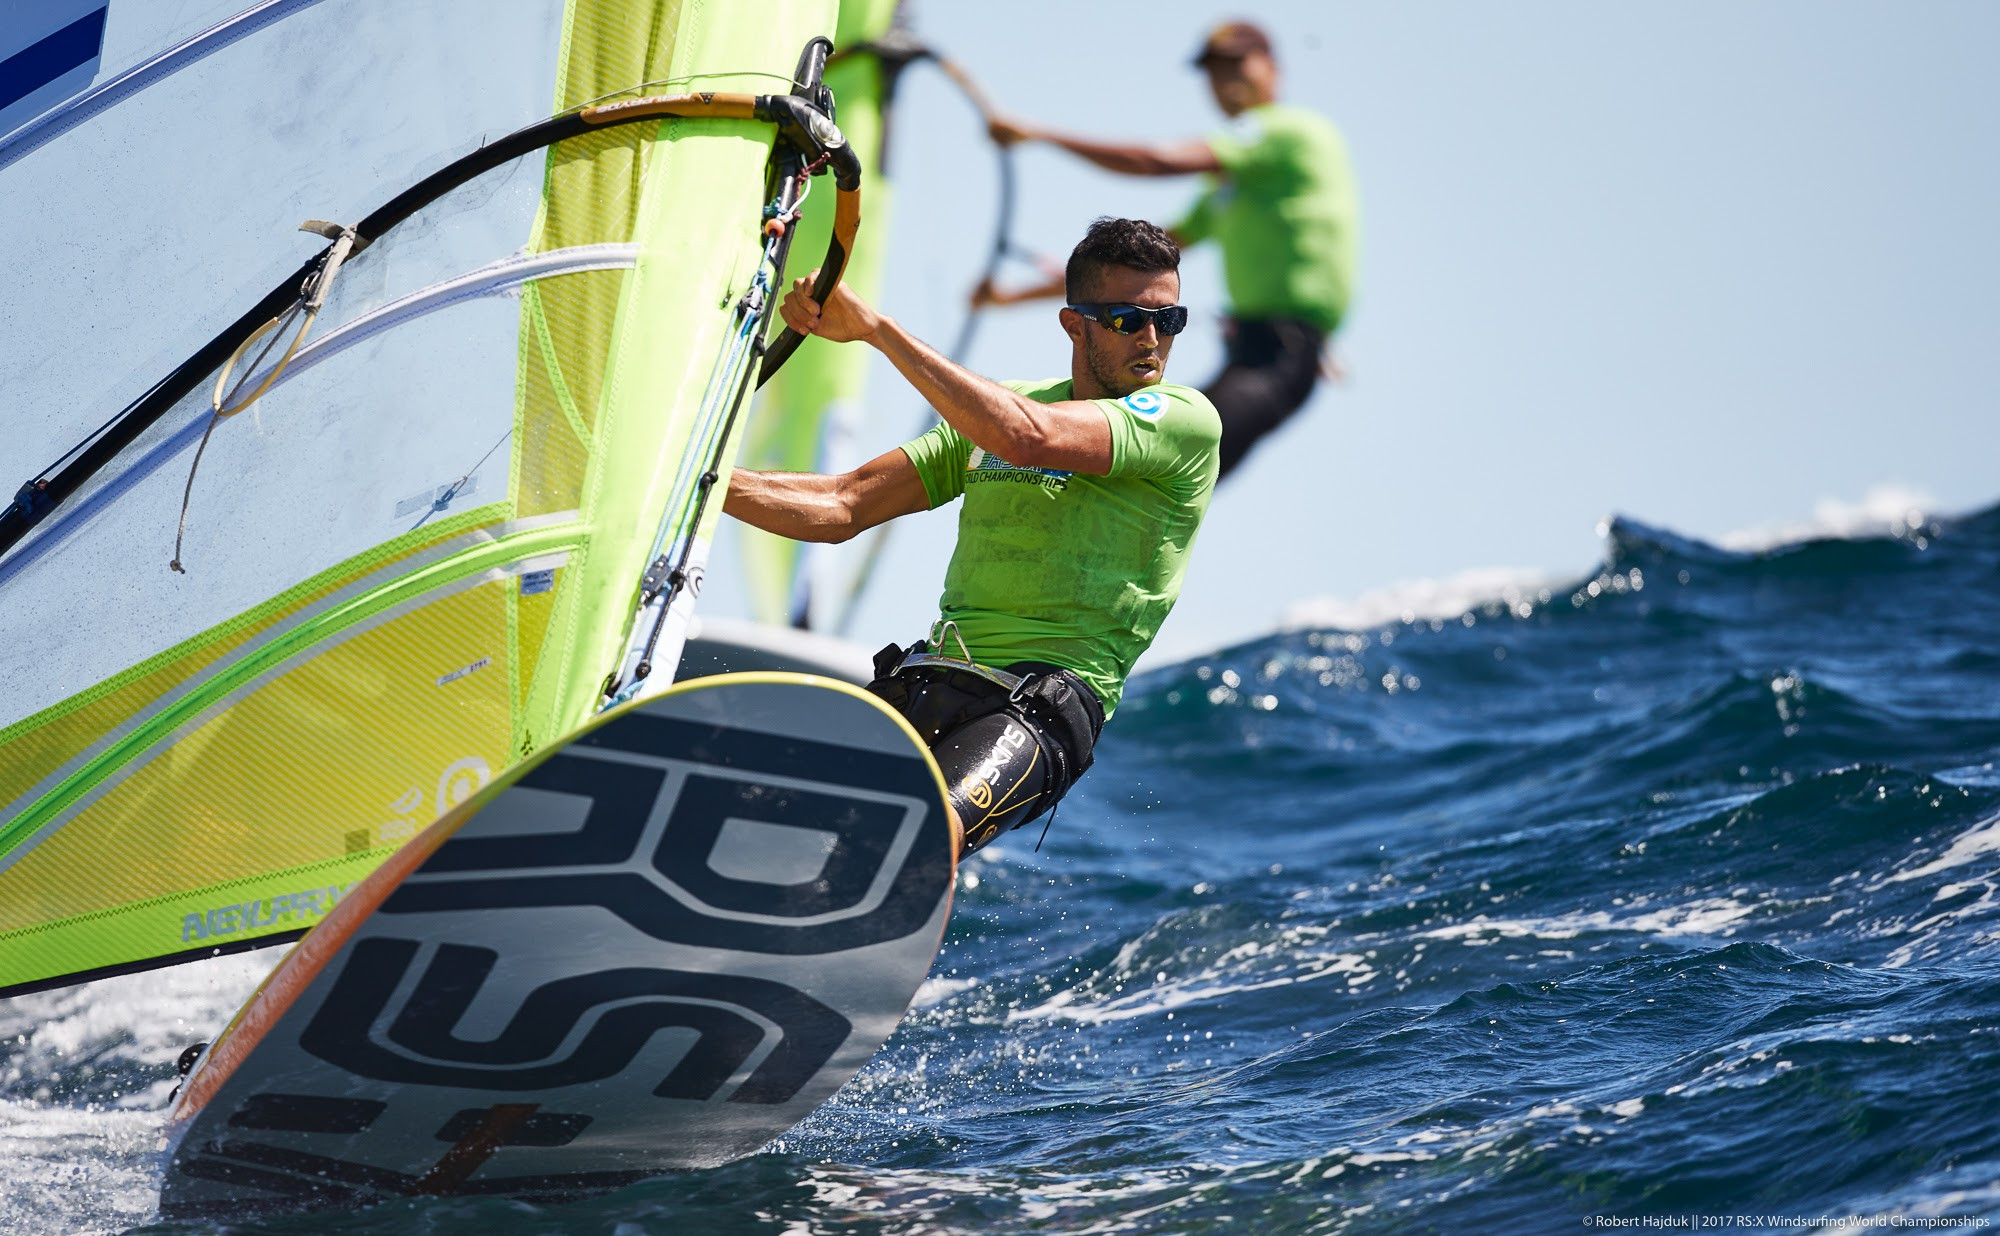 Frenchman keeps men's lead at RS:X Windsurfing World Championships